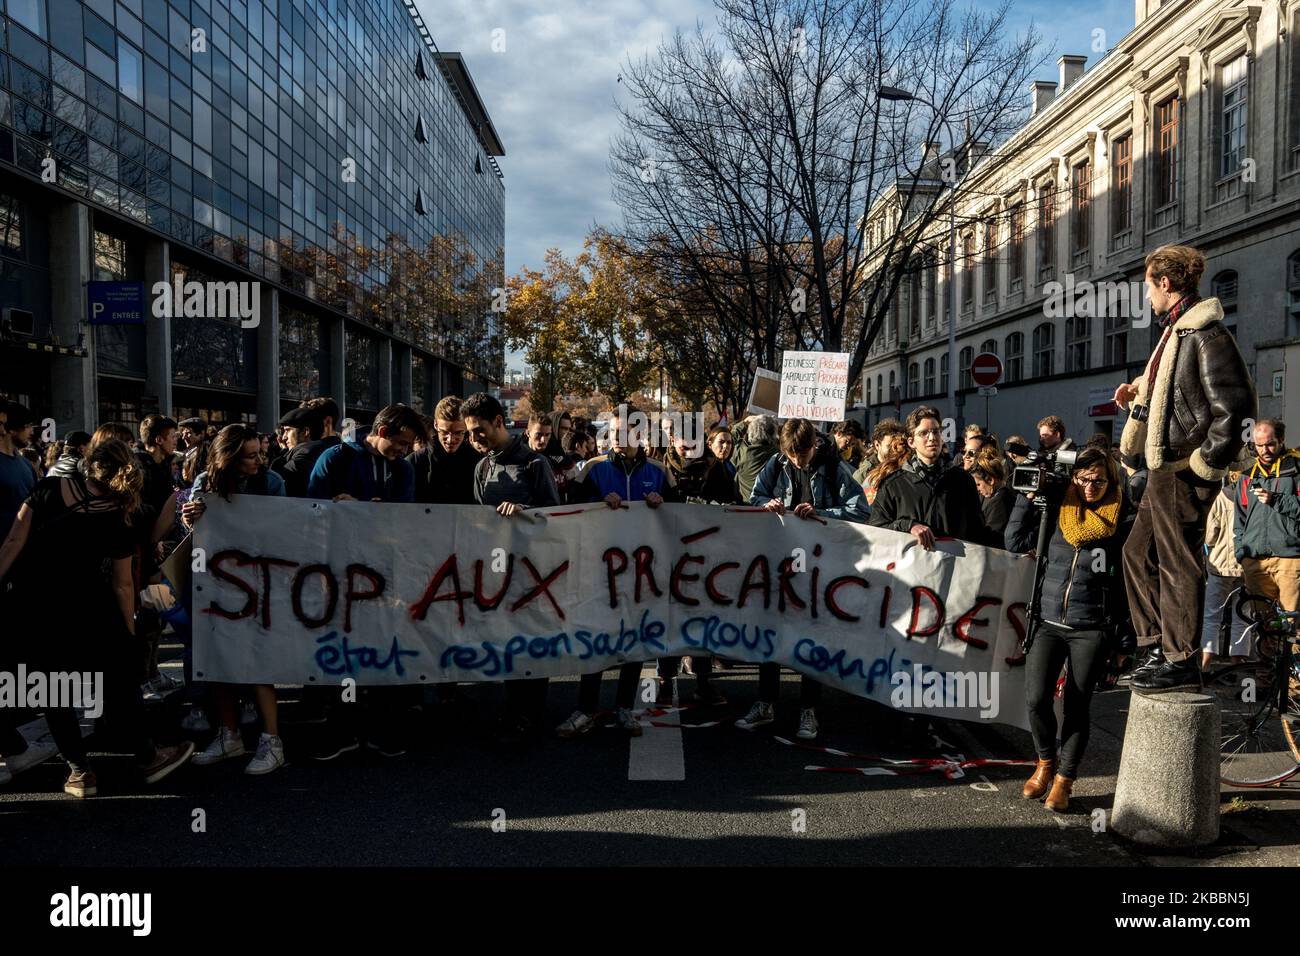 Demonstration against students precariousness and financial problems in Lyon, France,, on November 26, 2019. Several rallies were organized throughout France at the call of the Solidaires Etudiants trade unions. The student protest movement against precariousness follows the suicide attempt of a student from Lyon on November 8, 2019 in front of the Crous' offices. (Photo by Nicolas Liponne/NurPhoto) Stock Photo